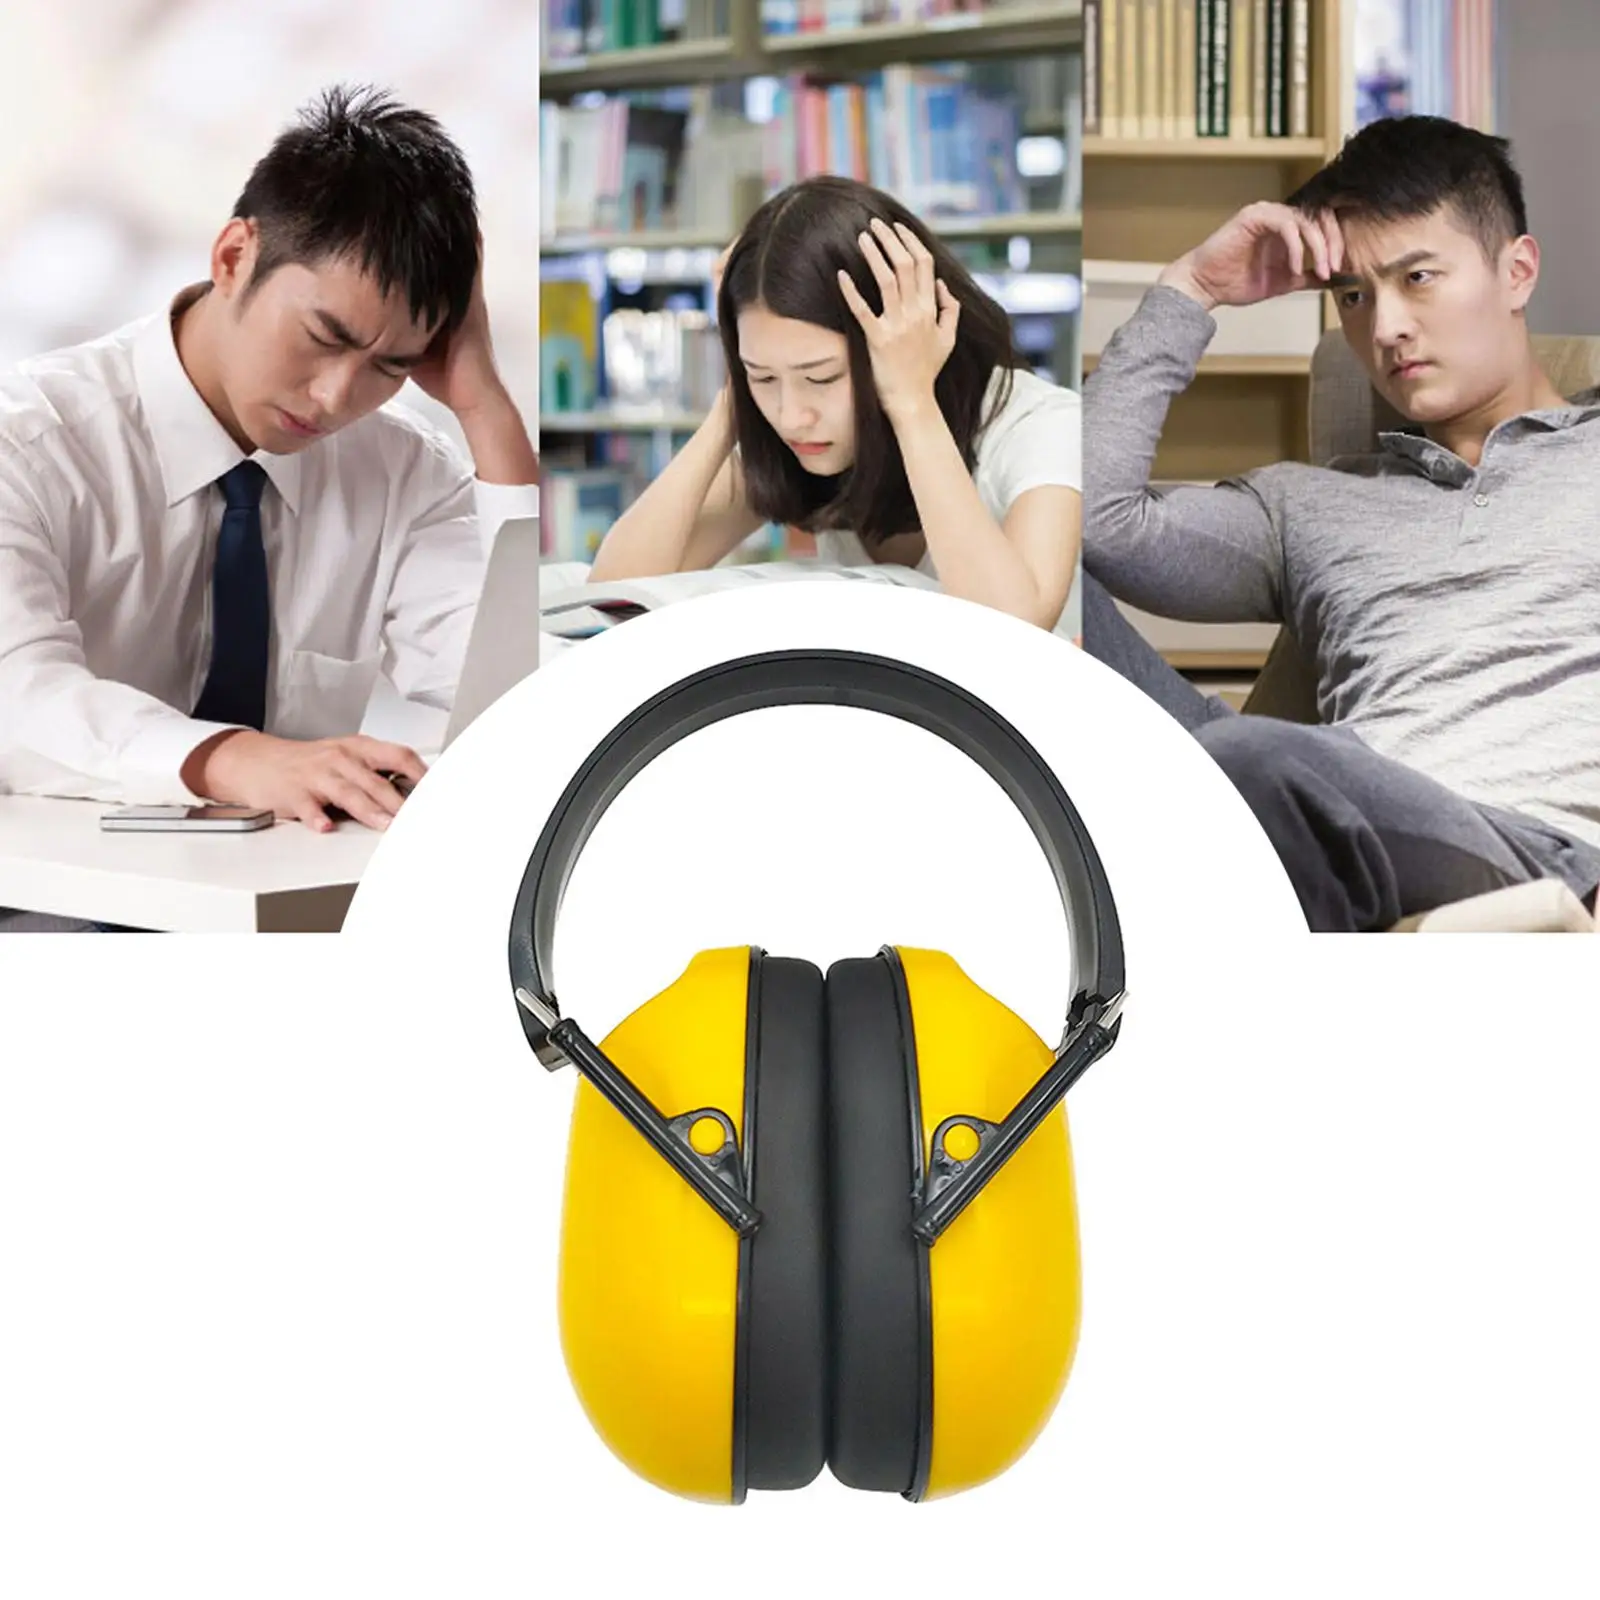 Ear Muffs Hearing Protection Noise Reduction Headband Ear Defenders for Airports Sports Events Loud Wedding